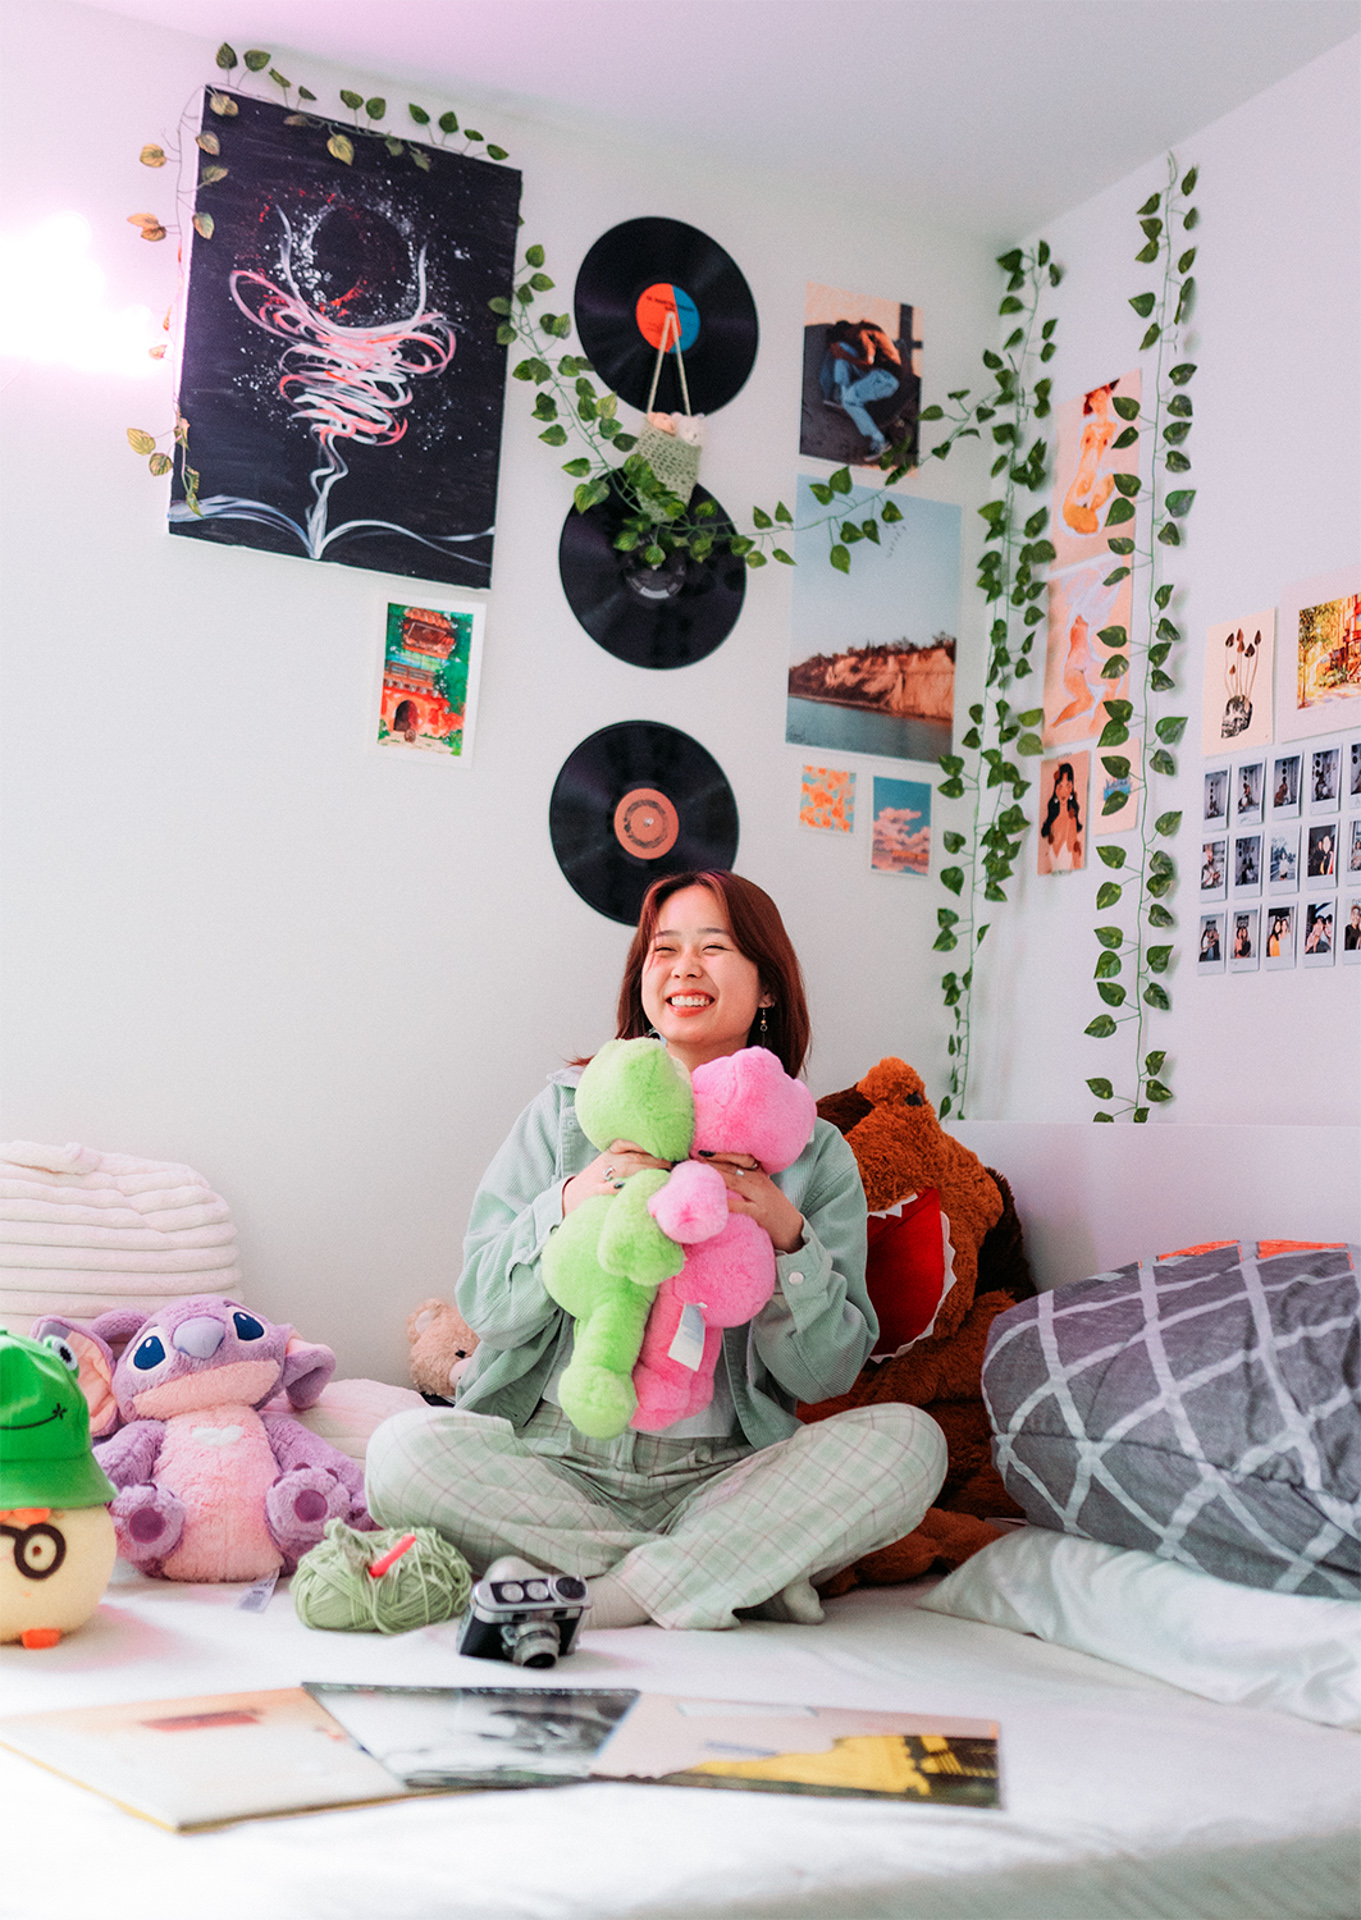 A portrait of a someone surrounded by stuffed animals and various objects of their room, they sit on their bed and smile while holding two stuffed animals in both hands